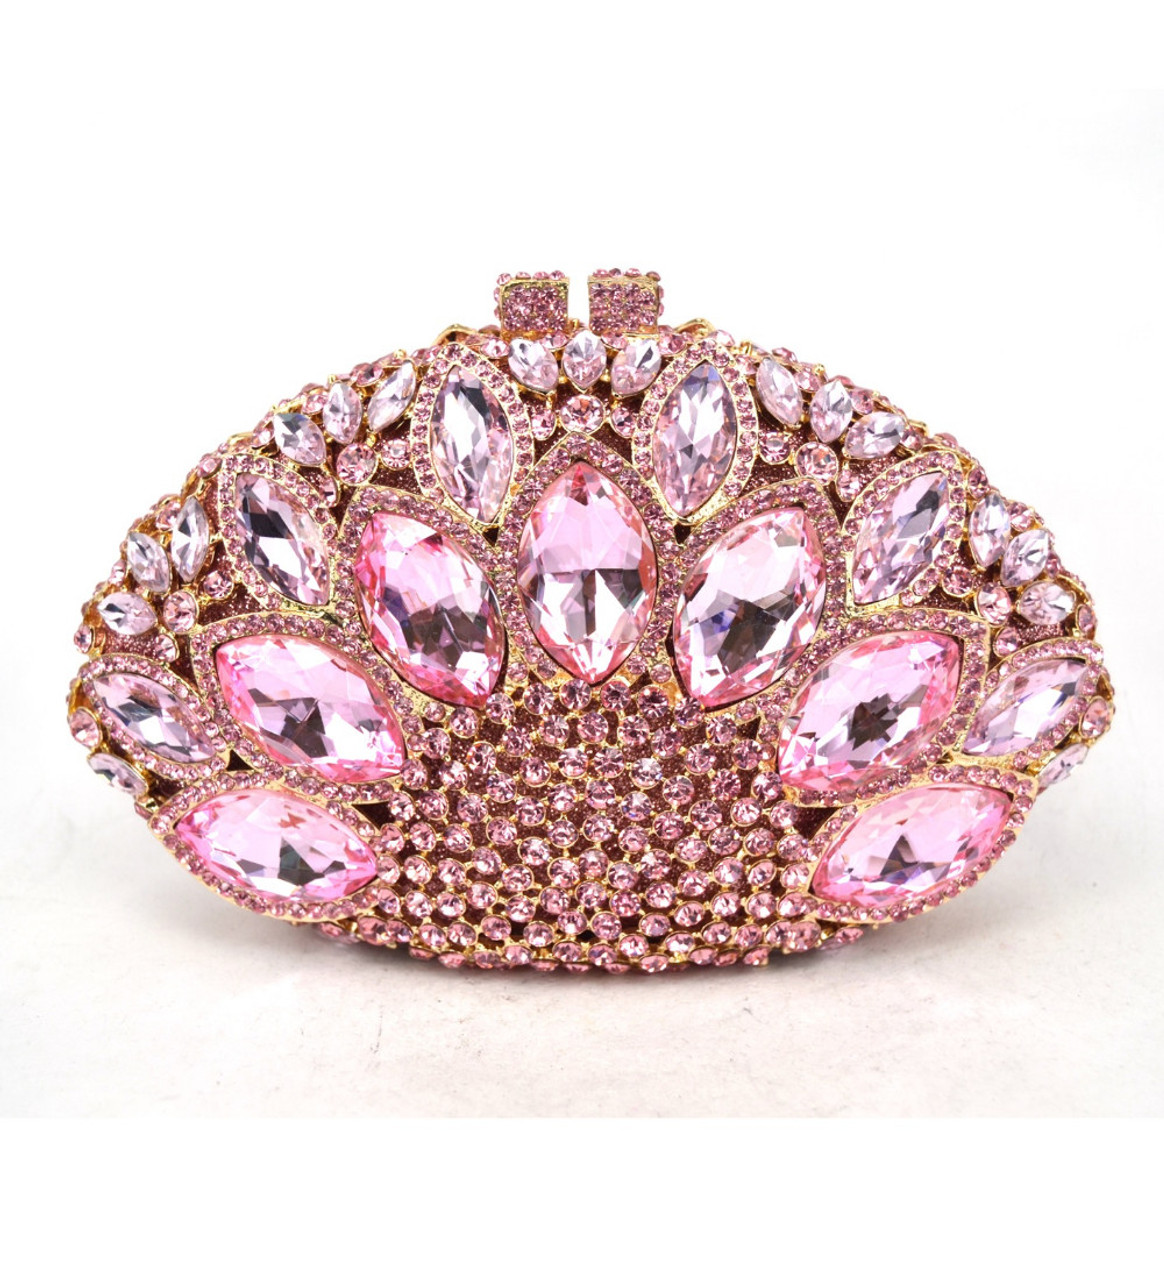 Pink April Diary - Best Designer Evening Bags For Your Party